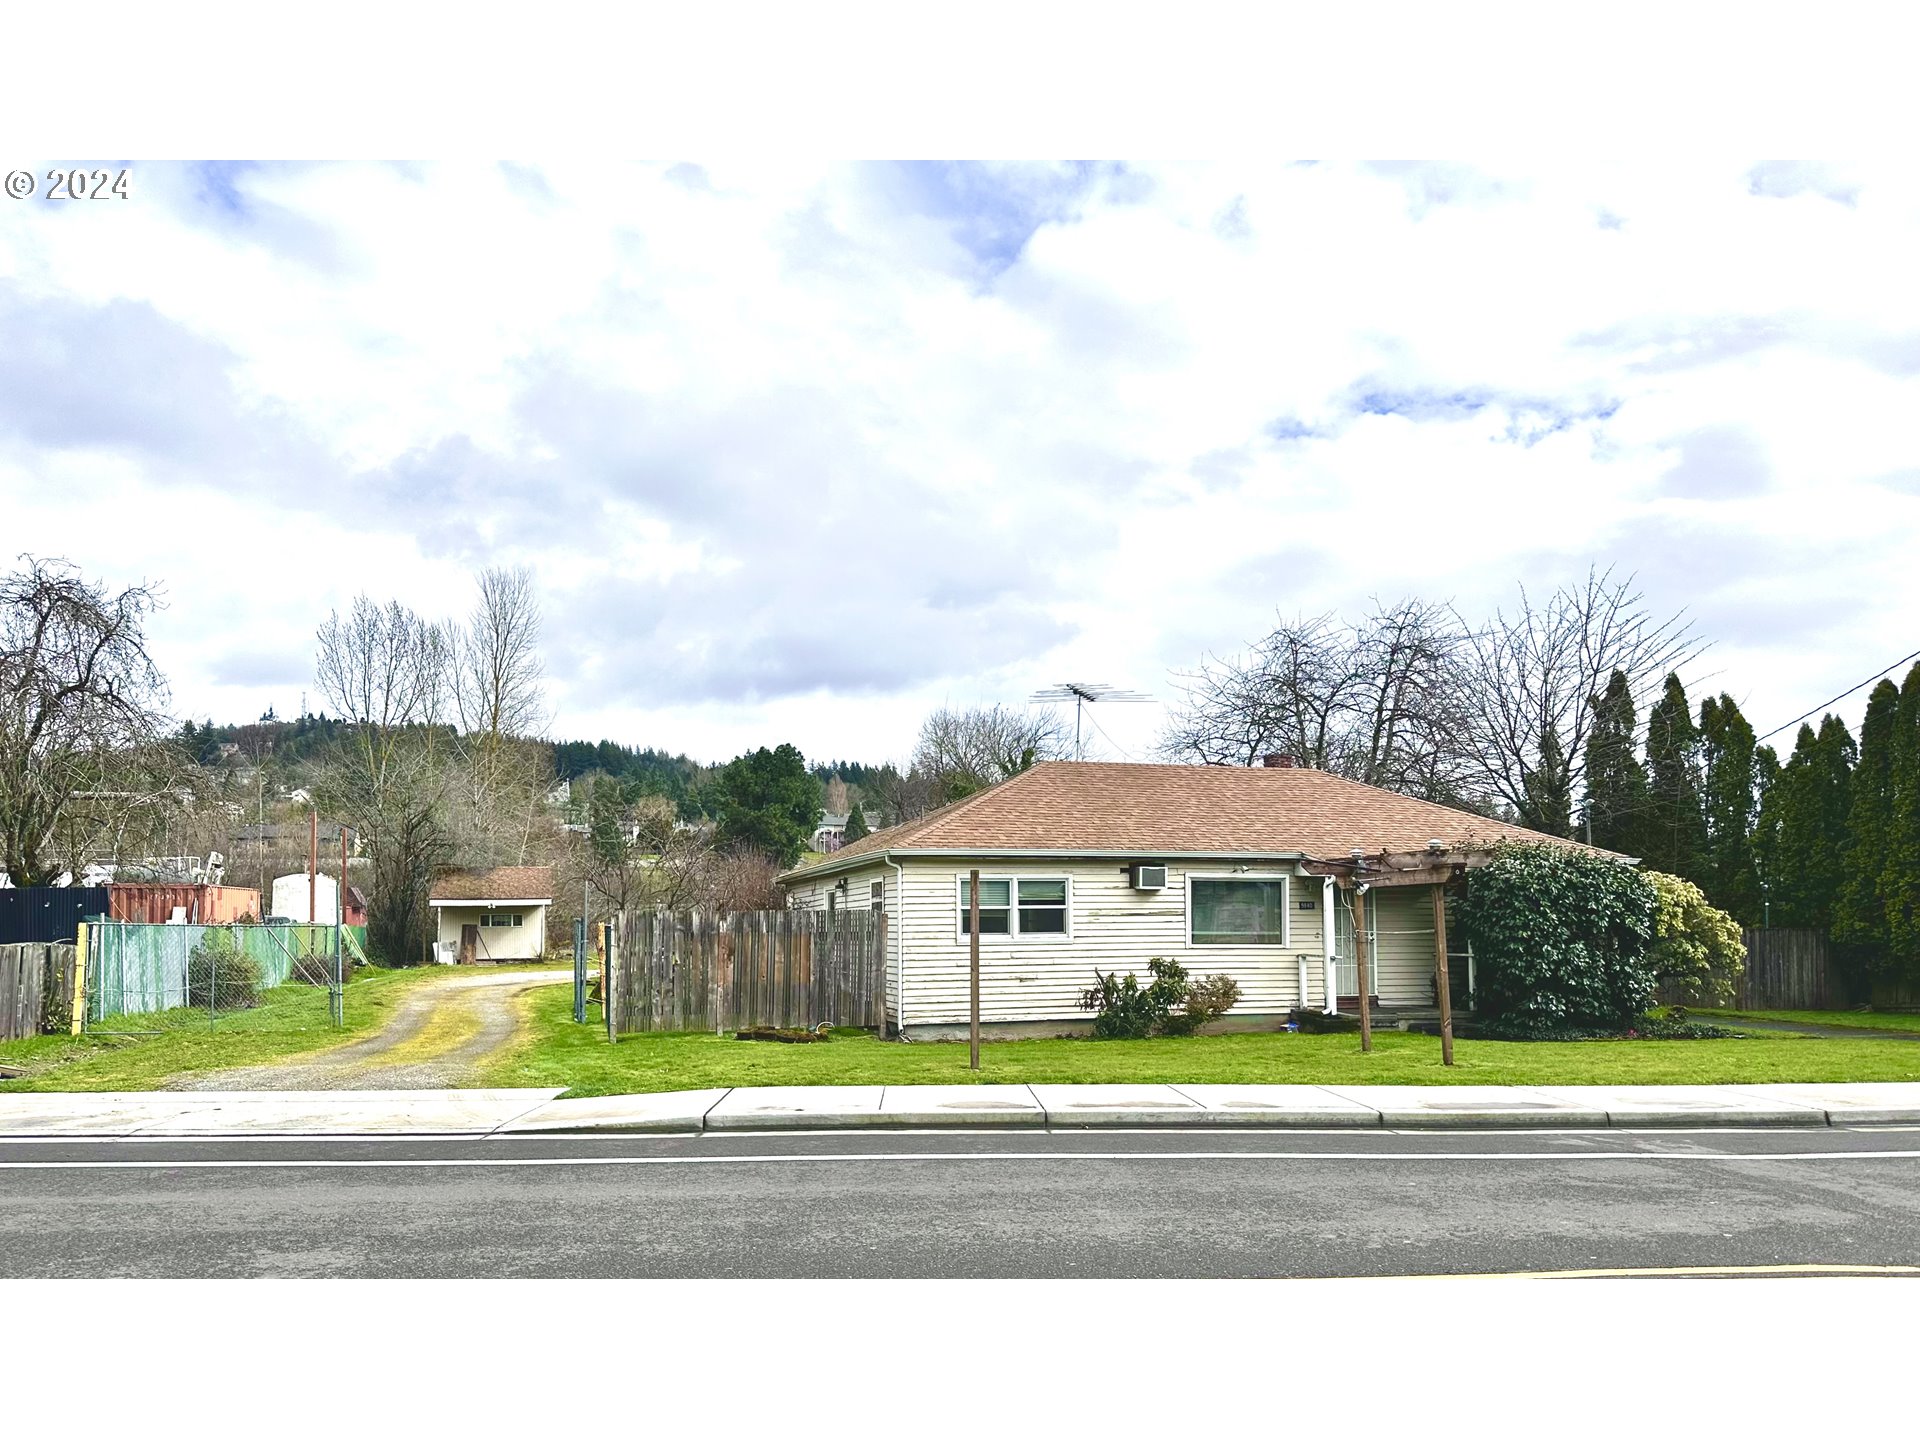 Exciting opportunity to own commercial land in Happy Valley! .74 acres available close to shopping, restaurants, and more!Zoned for possible multifamily. Buyer to do own due diligence.